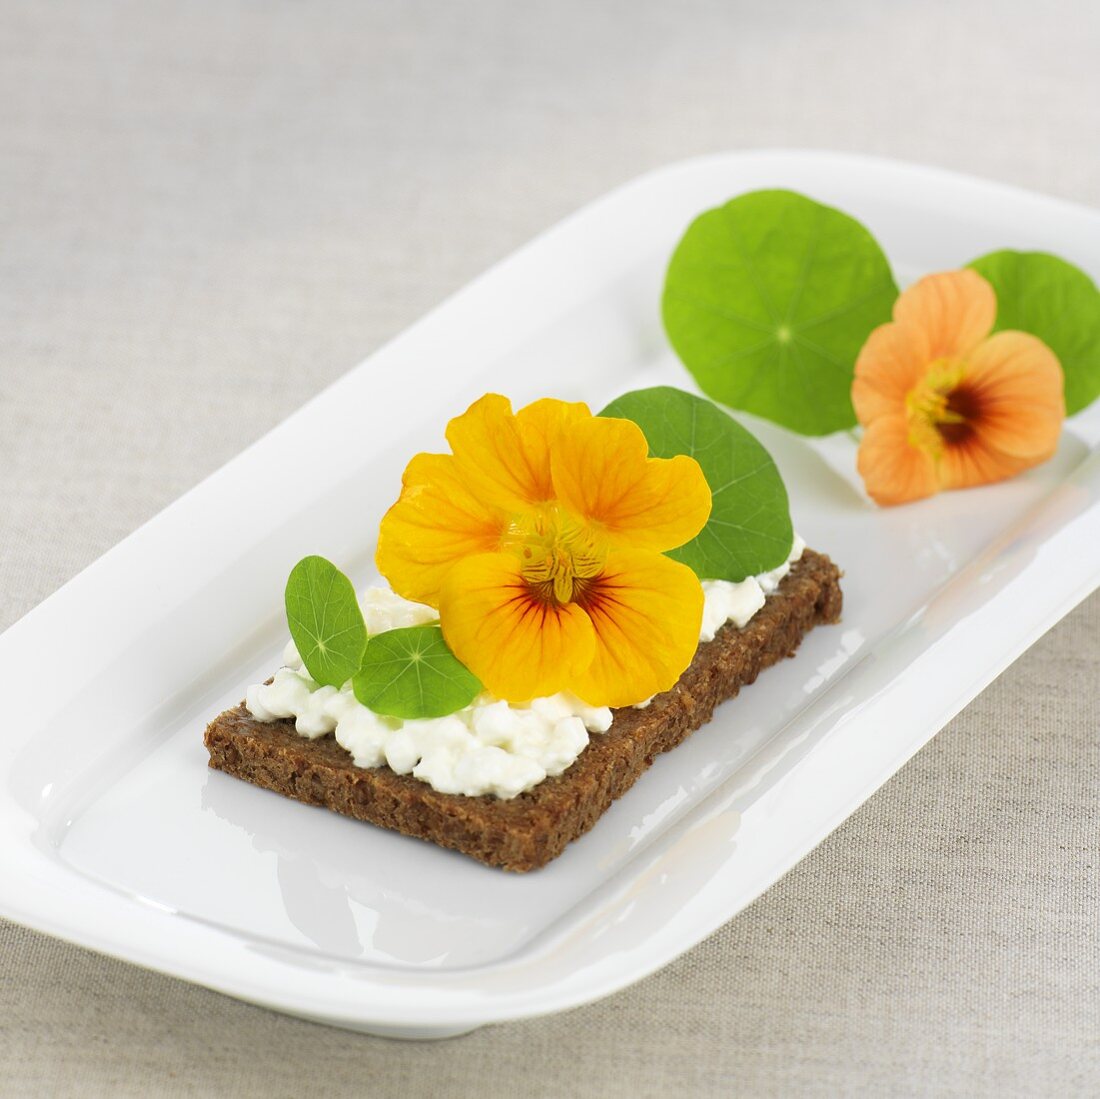 Cottage cheese and nasturtium flowers on wholemeal bread